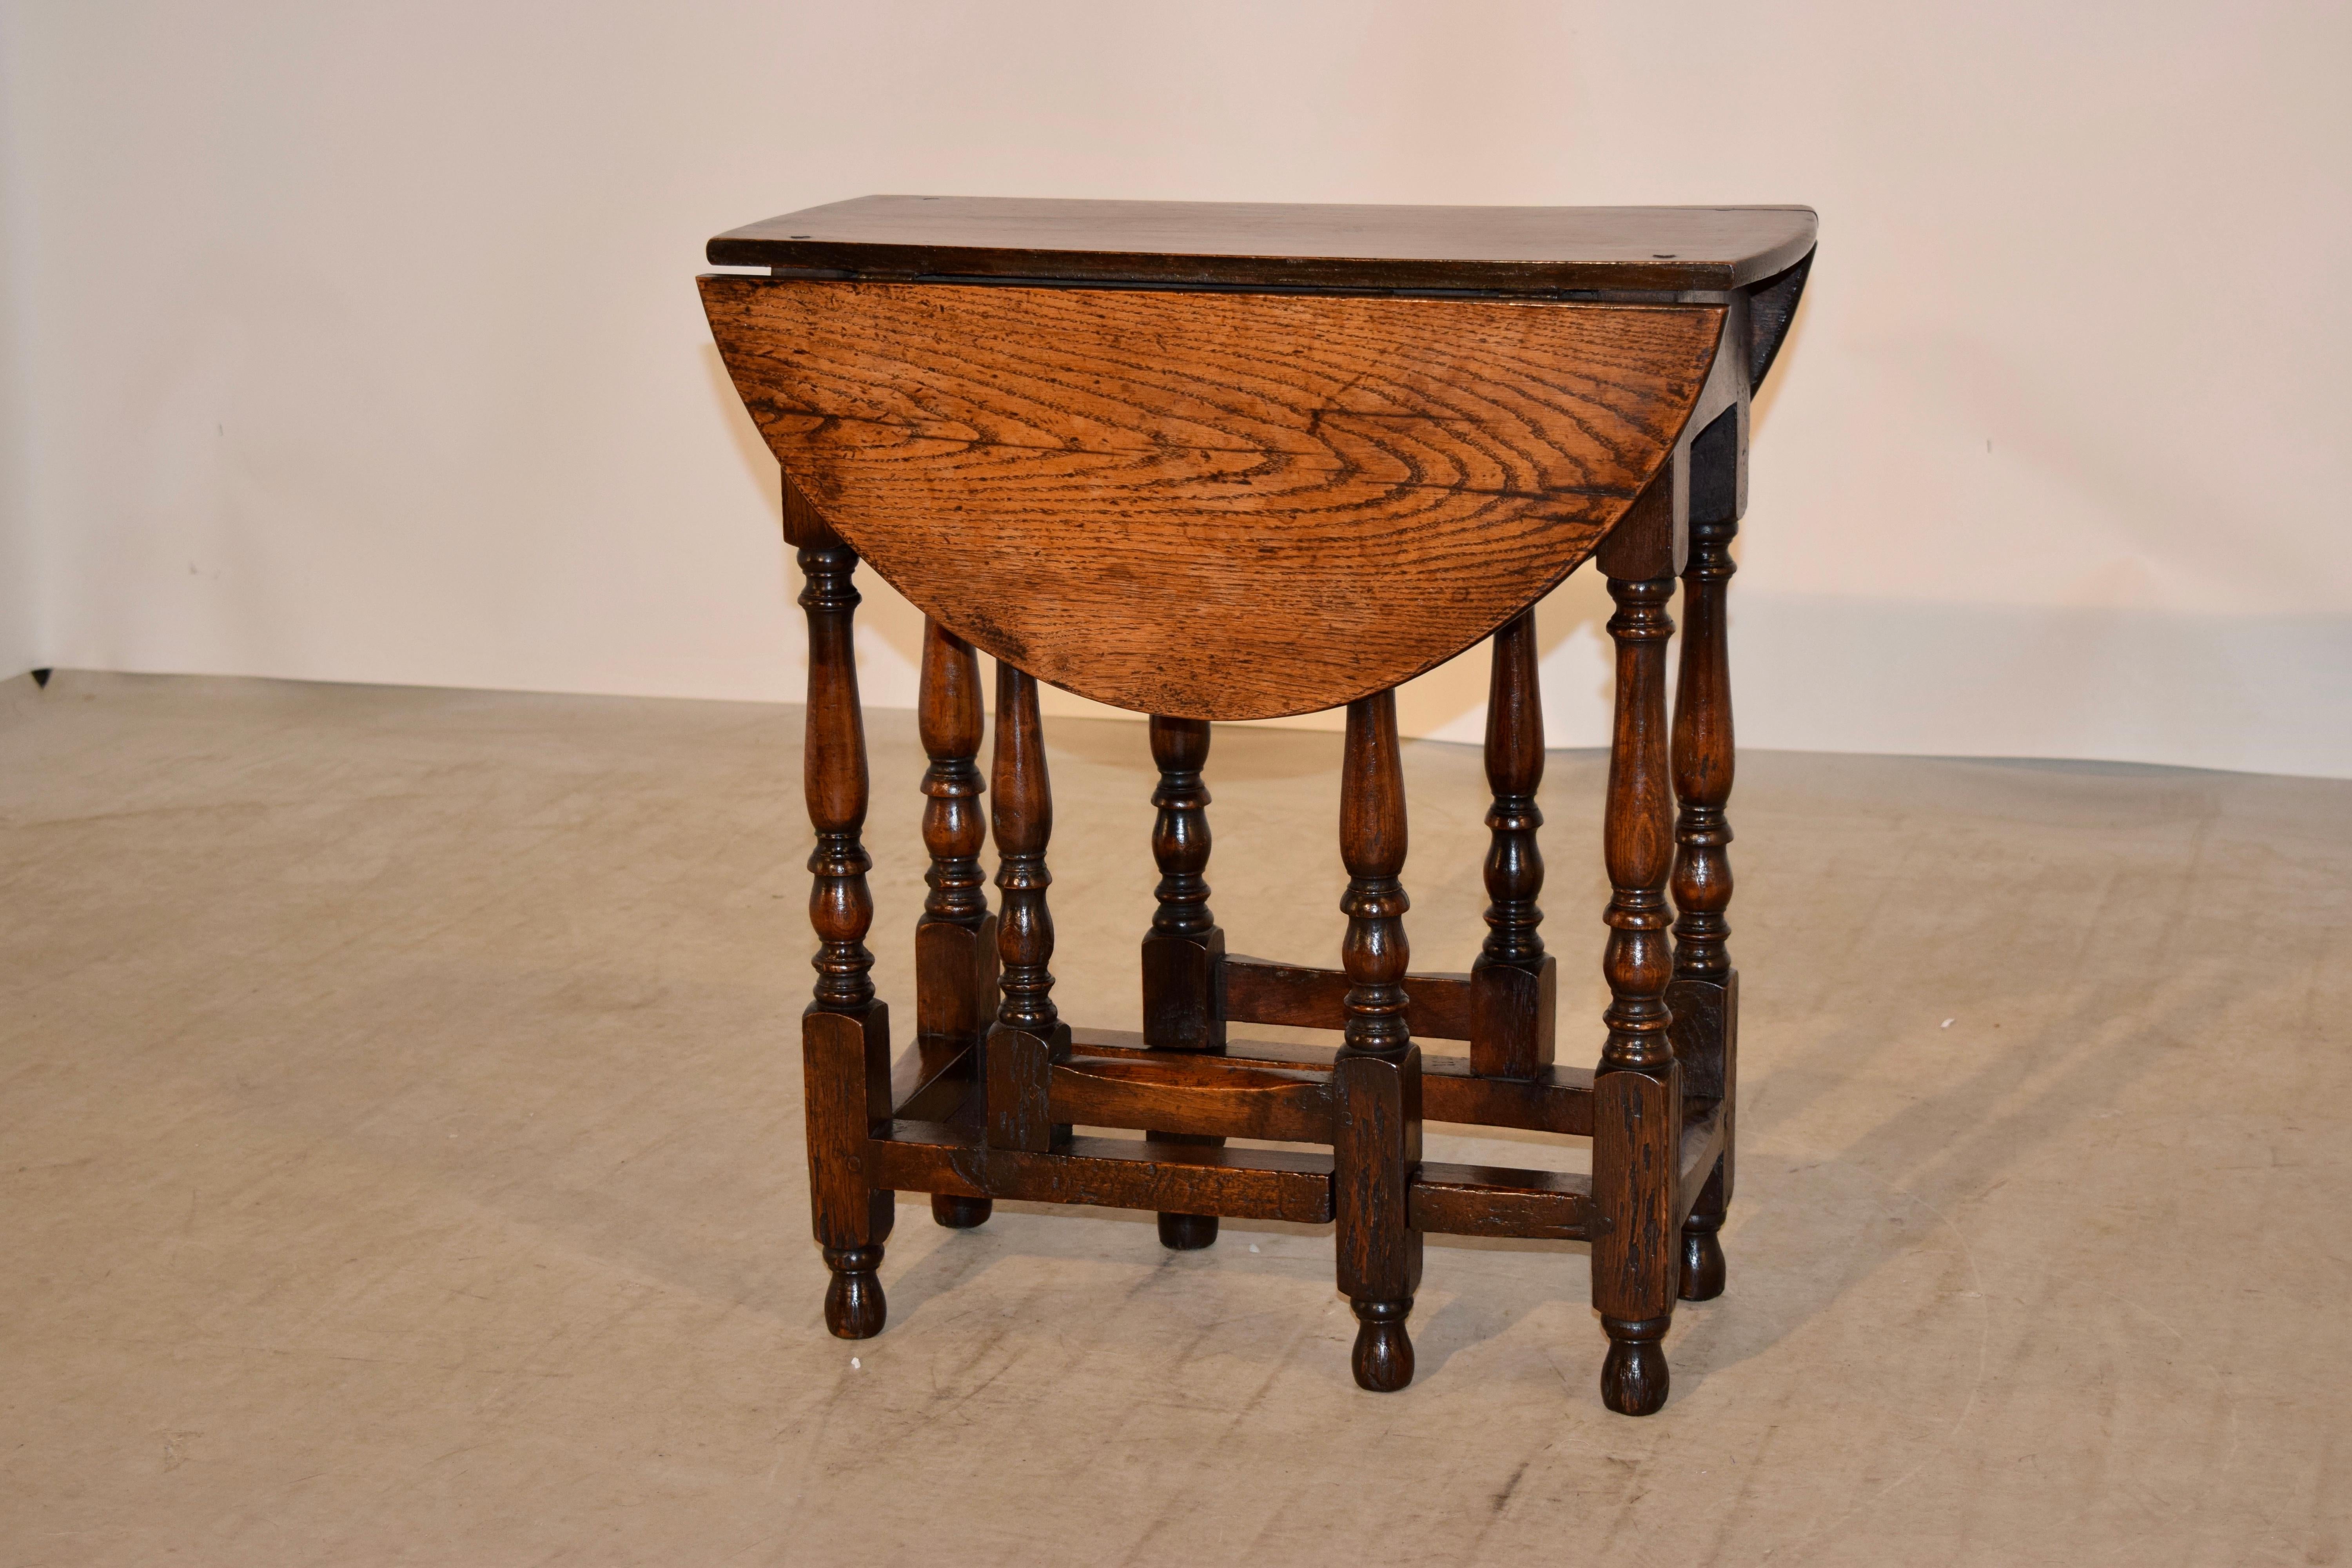 18th century English gate leg table made from oak. The top is pegged and follows down to a simple apron. It is supported on hand turned legs and gates, which are joined by simple stretchers. The top has shrinkage and staining from age and use and